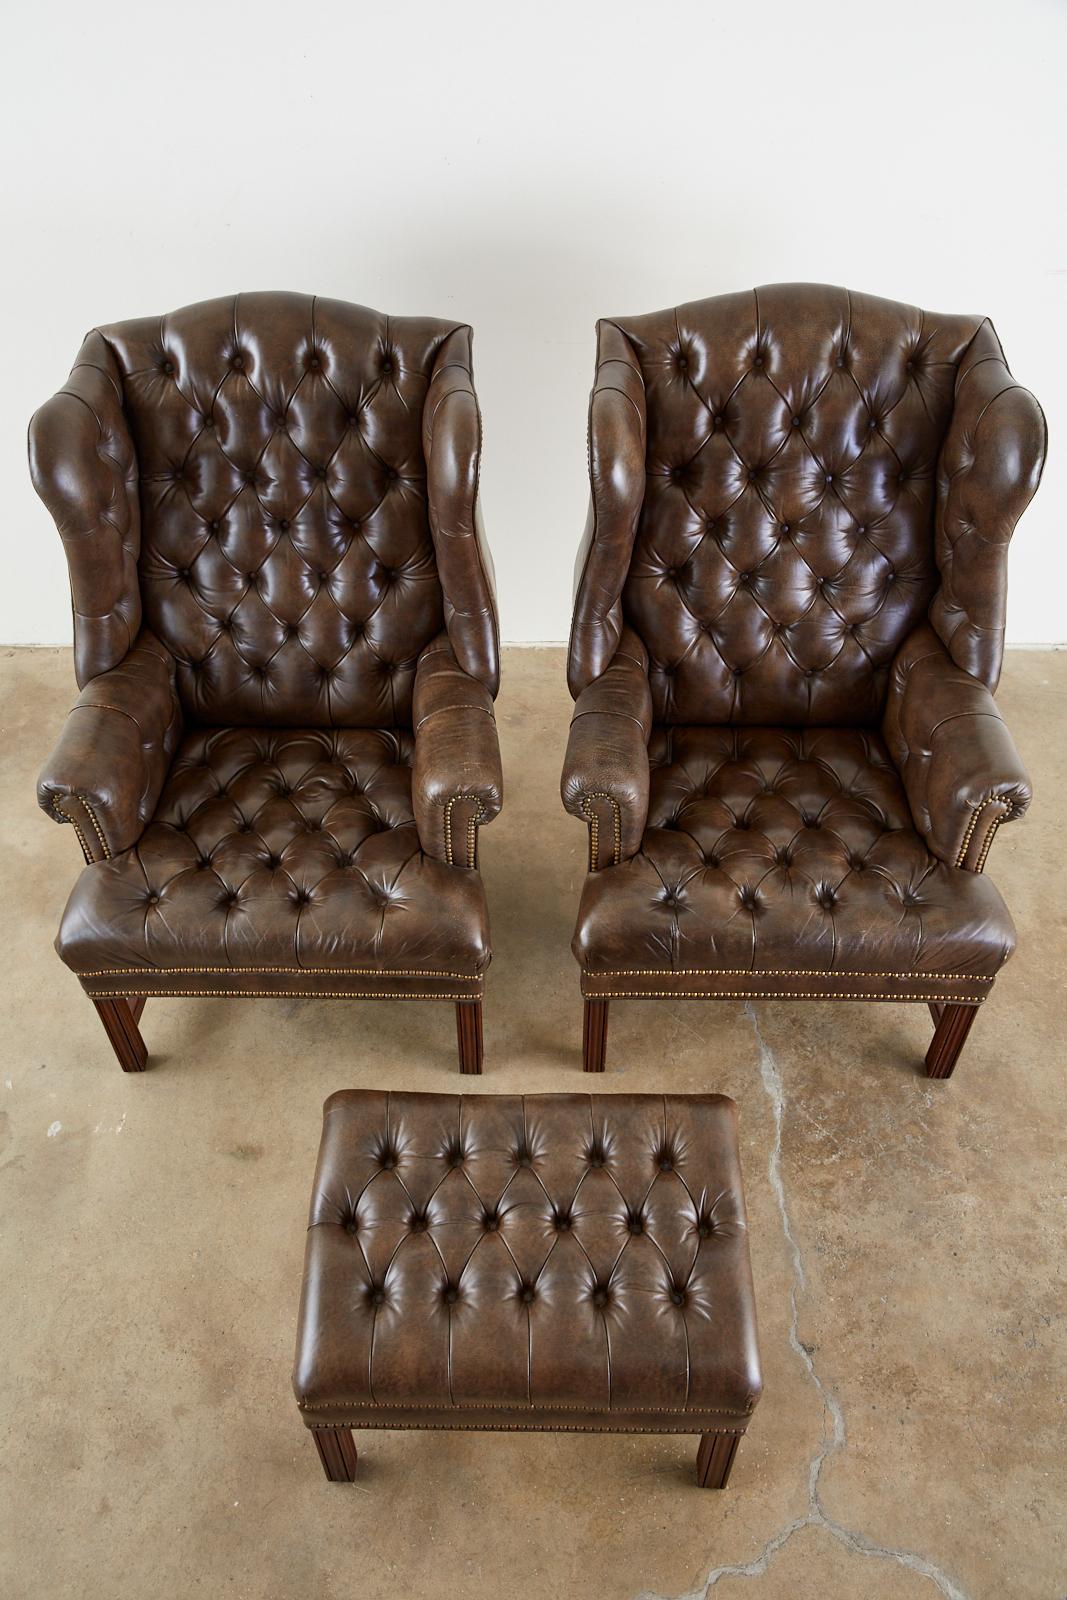 Hand-Crafted Pair of English Georgian Style Tufted Leather Wingbacks with Ottoman